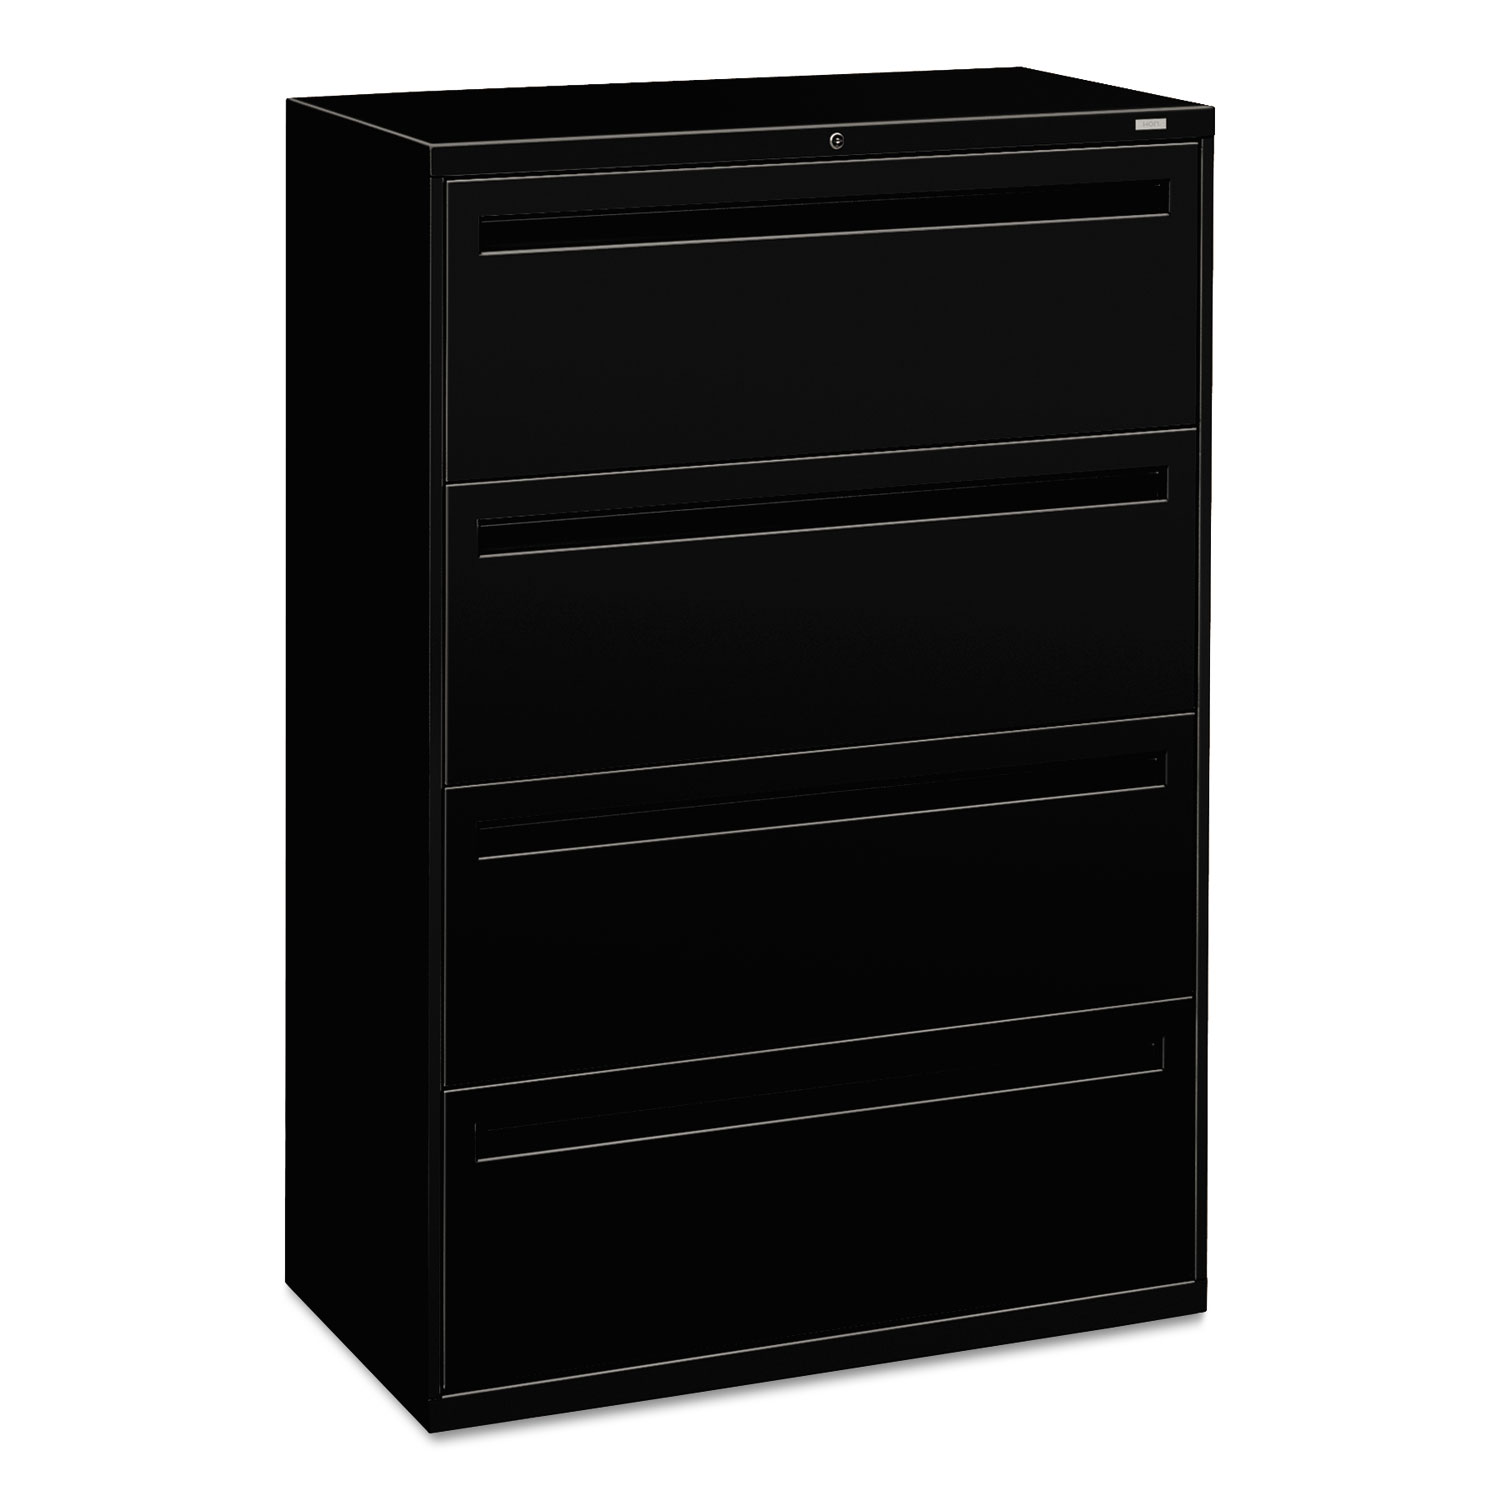 700 Series Four-Drawer Lateral File, 36w x 18d x 52 1/2h, Black